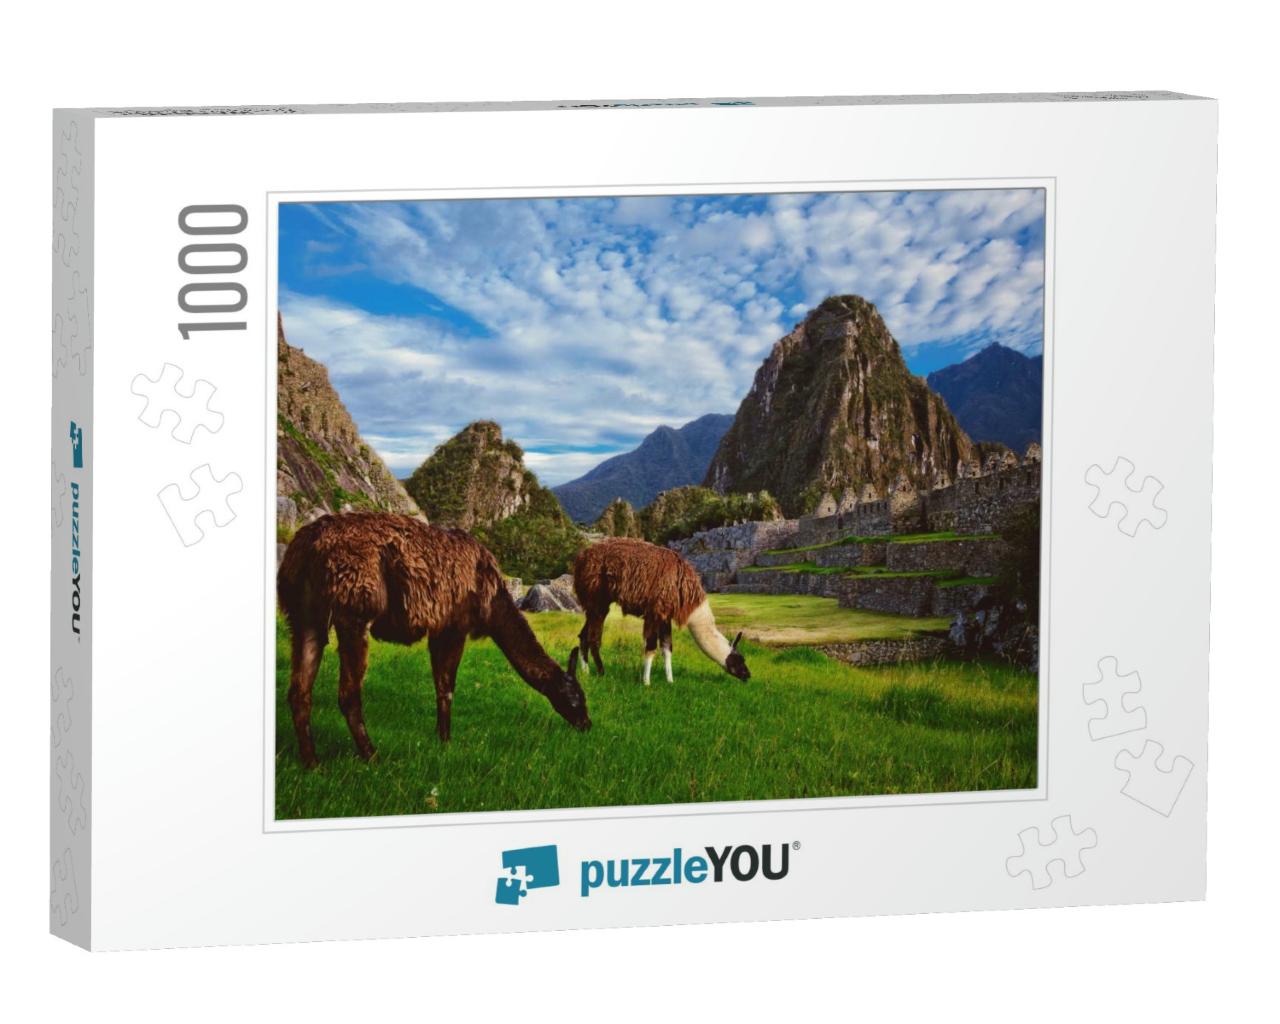 Two Llamas Eat Grass in the Inca Citadel of Machu Picchu... Jigsaw Puzzle with 1000 pieces